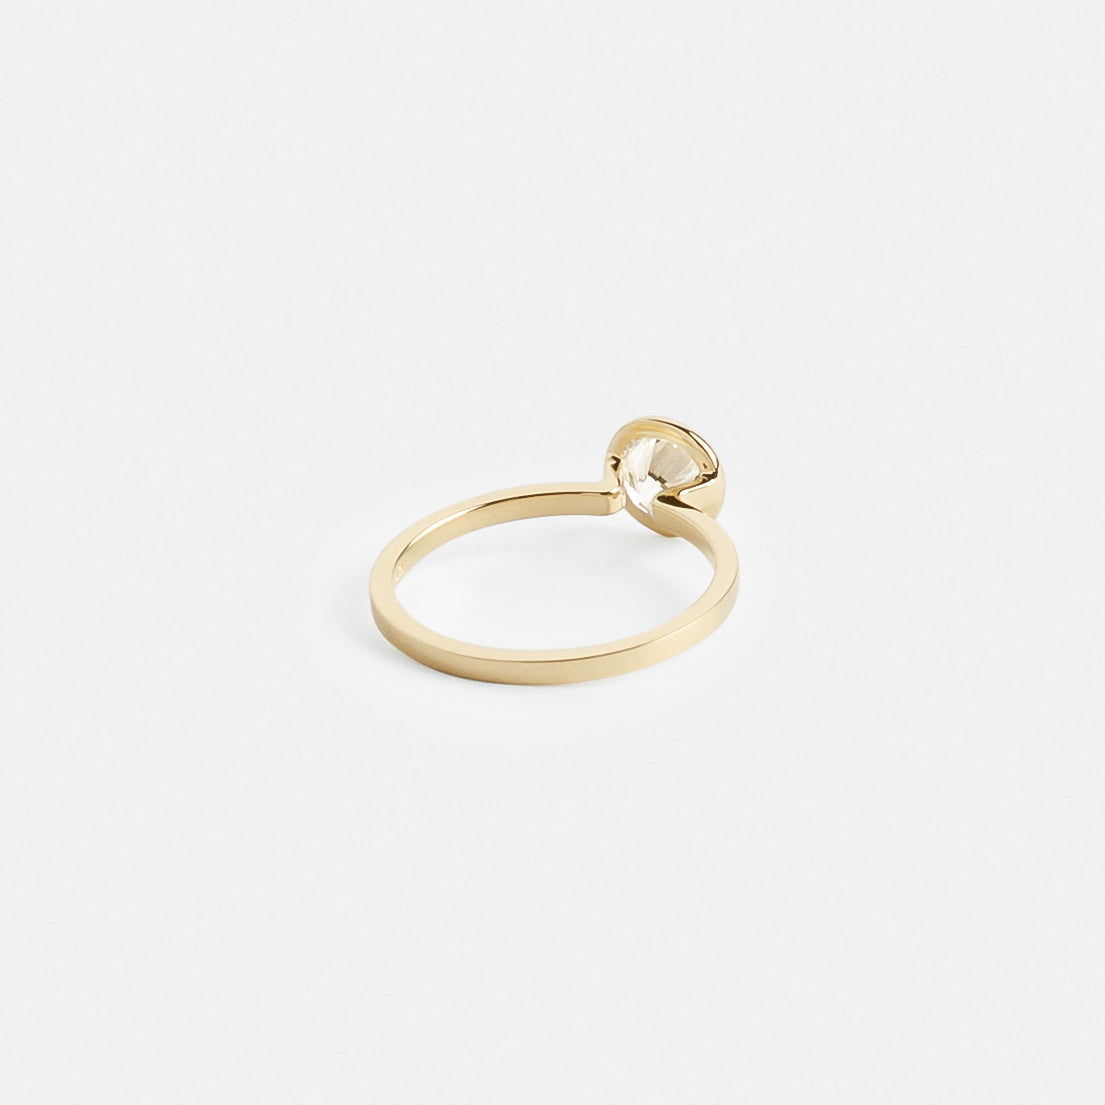 Mana Handmade Engagement Ring in 14k Gold set with a 1.01 carat round brilliant cut lab-grown diamond By SHW Fine Jewelry NYC